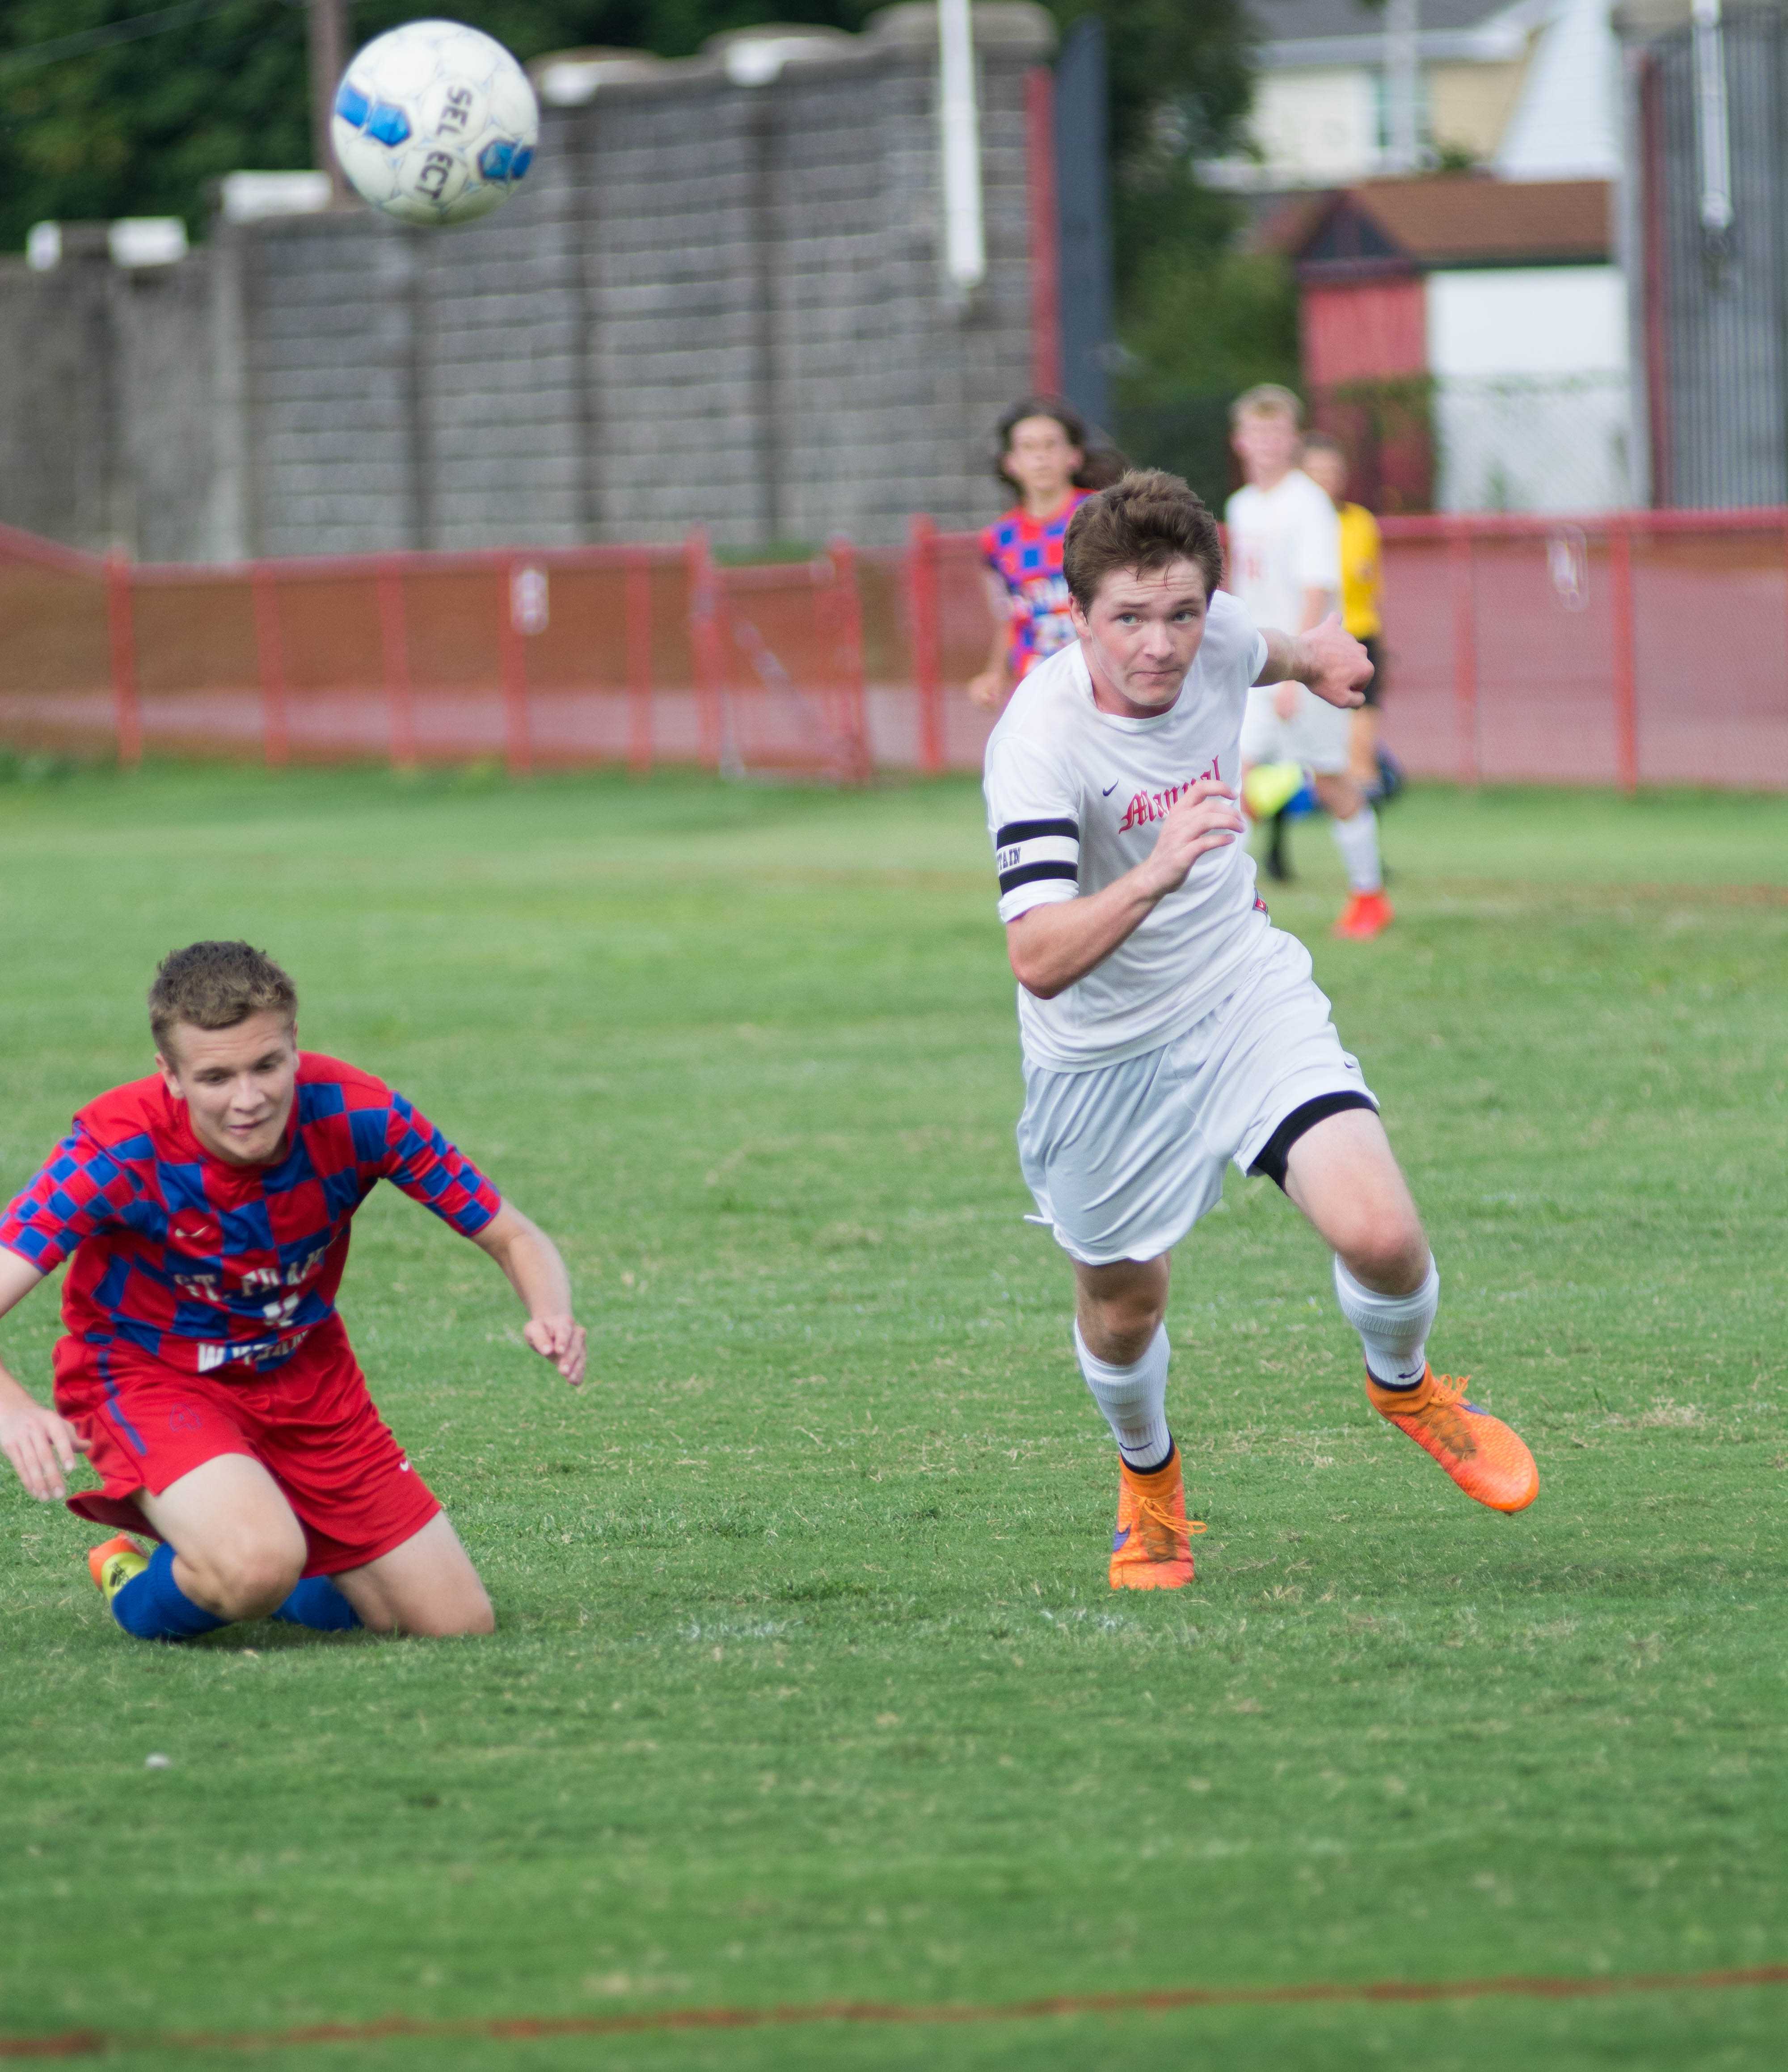 Dylan Barth (11,#9) rushes to the ball on a goal scoring opportunity.
Photo by Luke Smith